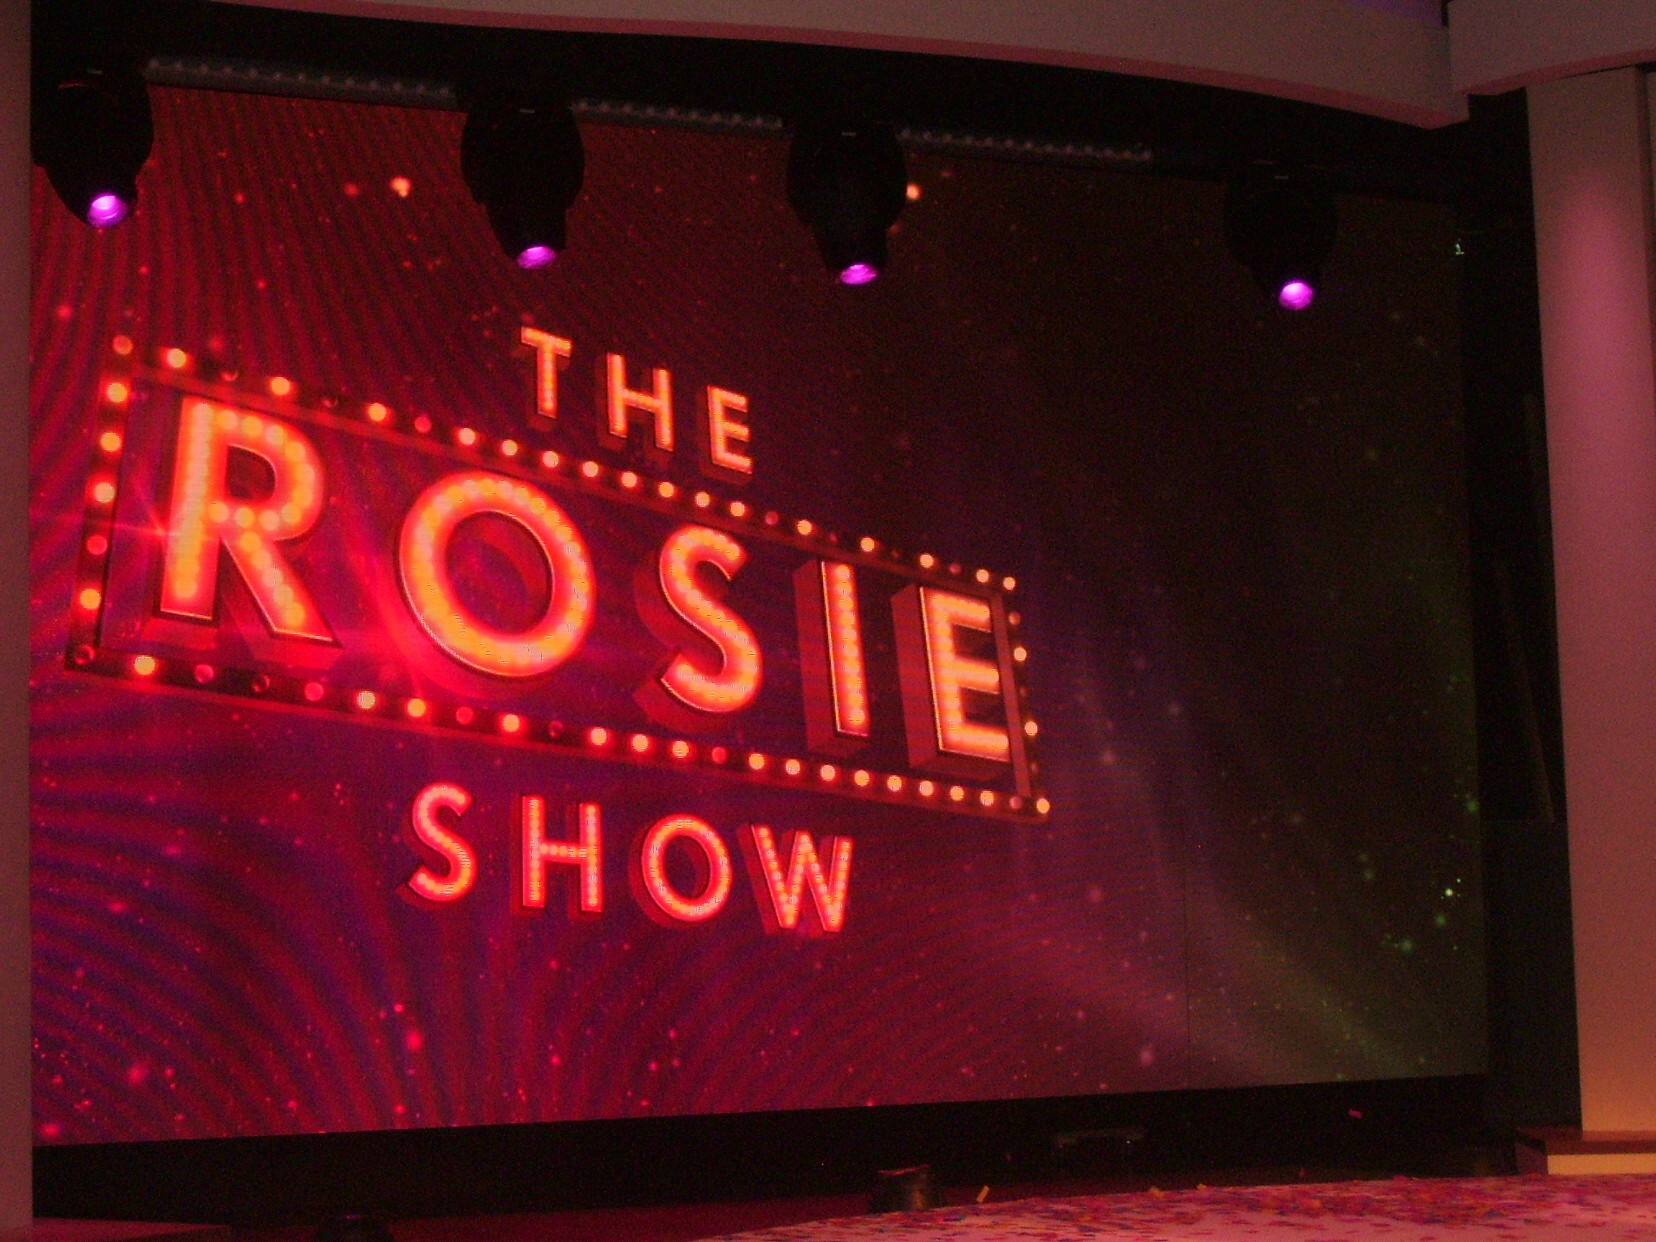 A Day at The Rosie Show!